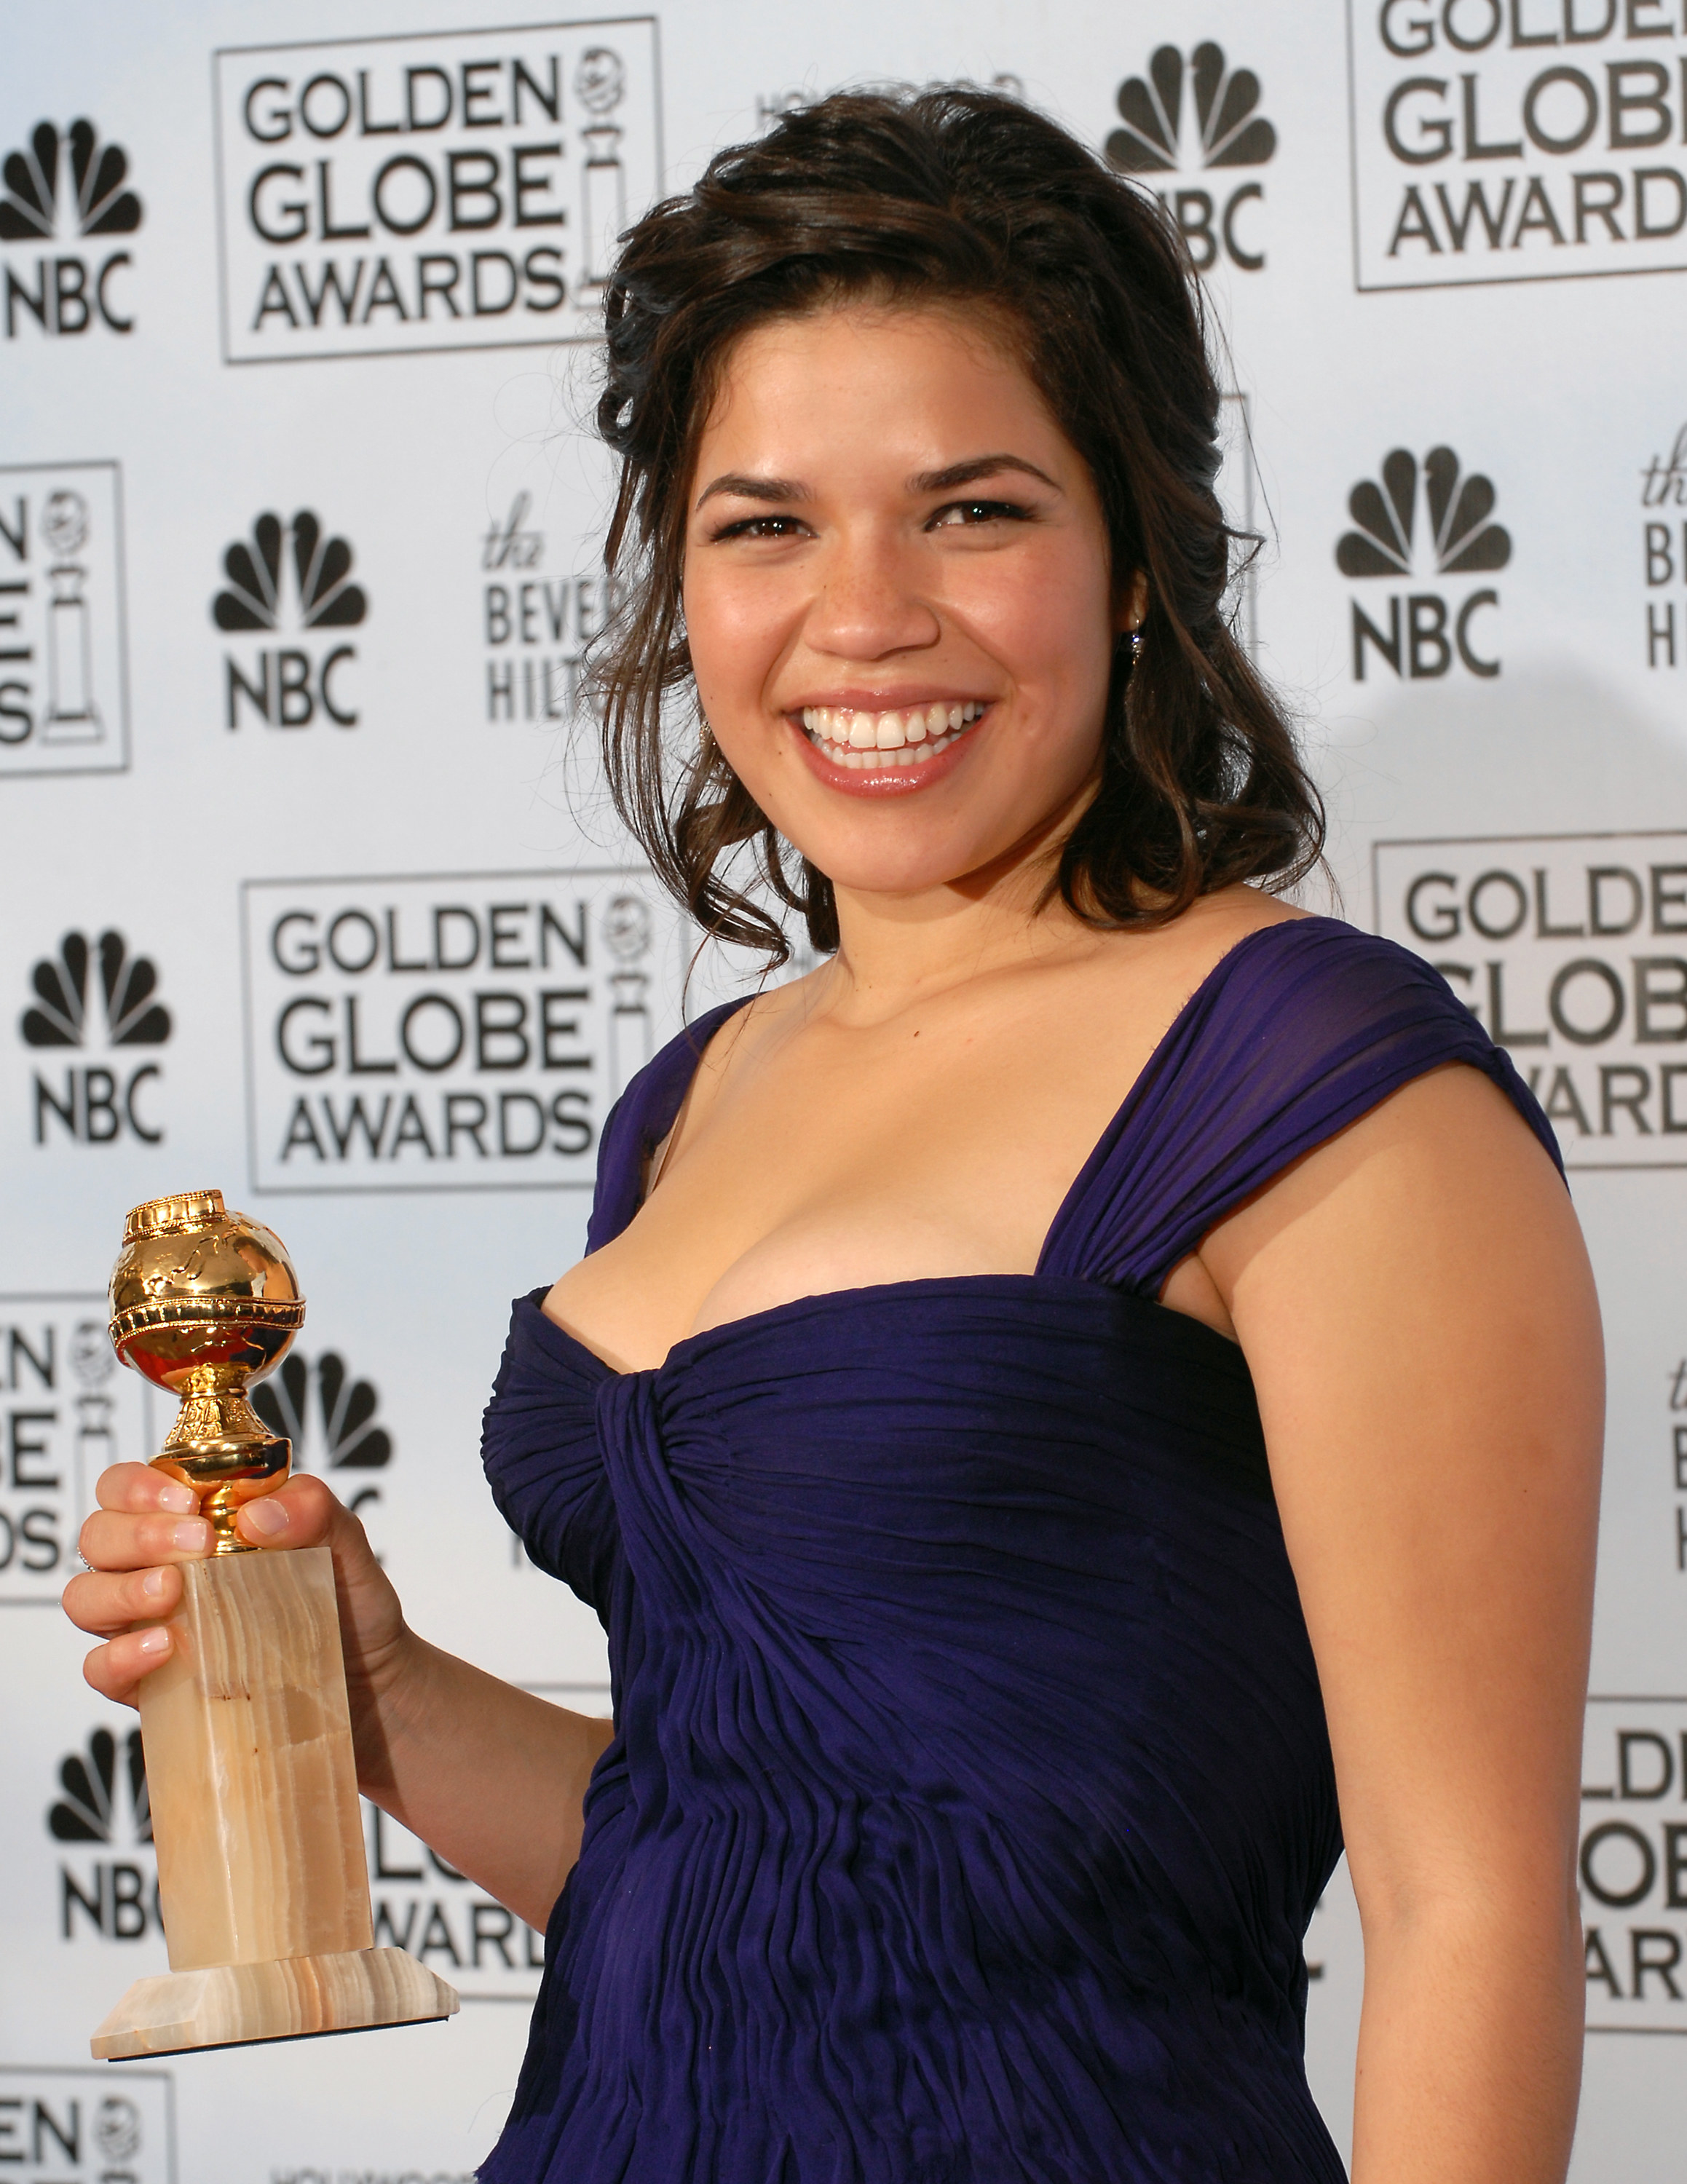 Winner America Ferrera backstage at the 64th Annual Golden Globe Awards, January 15, 2007 in Beverly Hills, California.